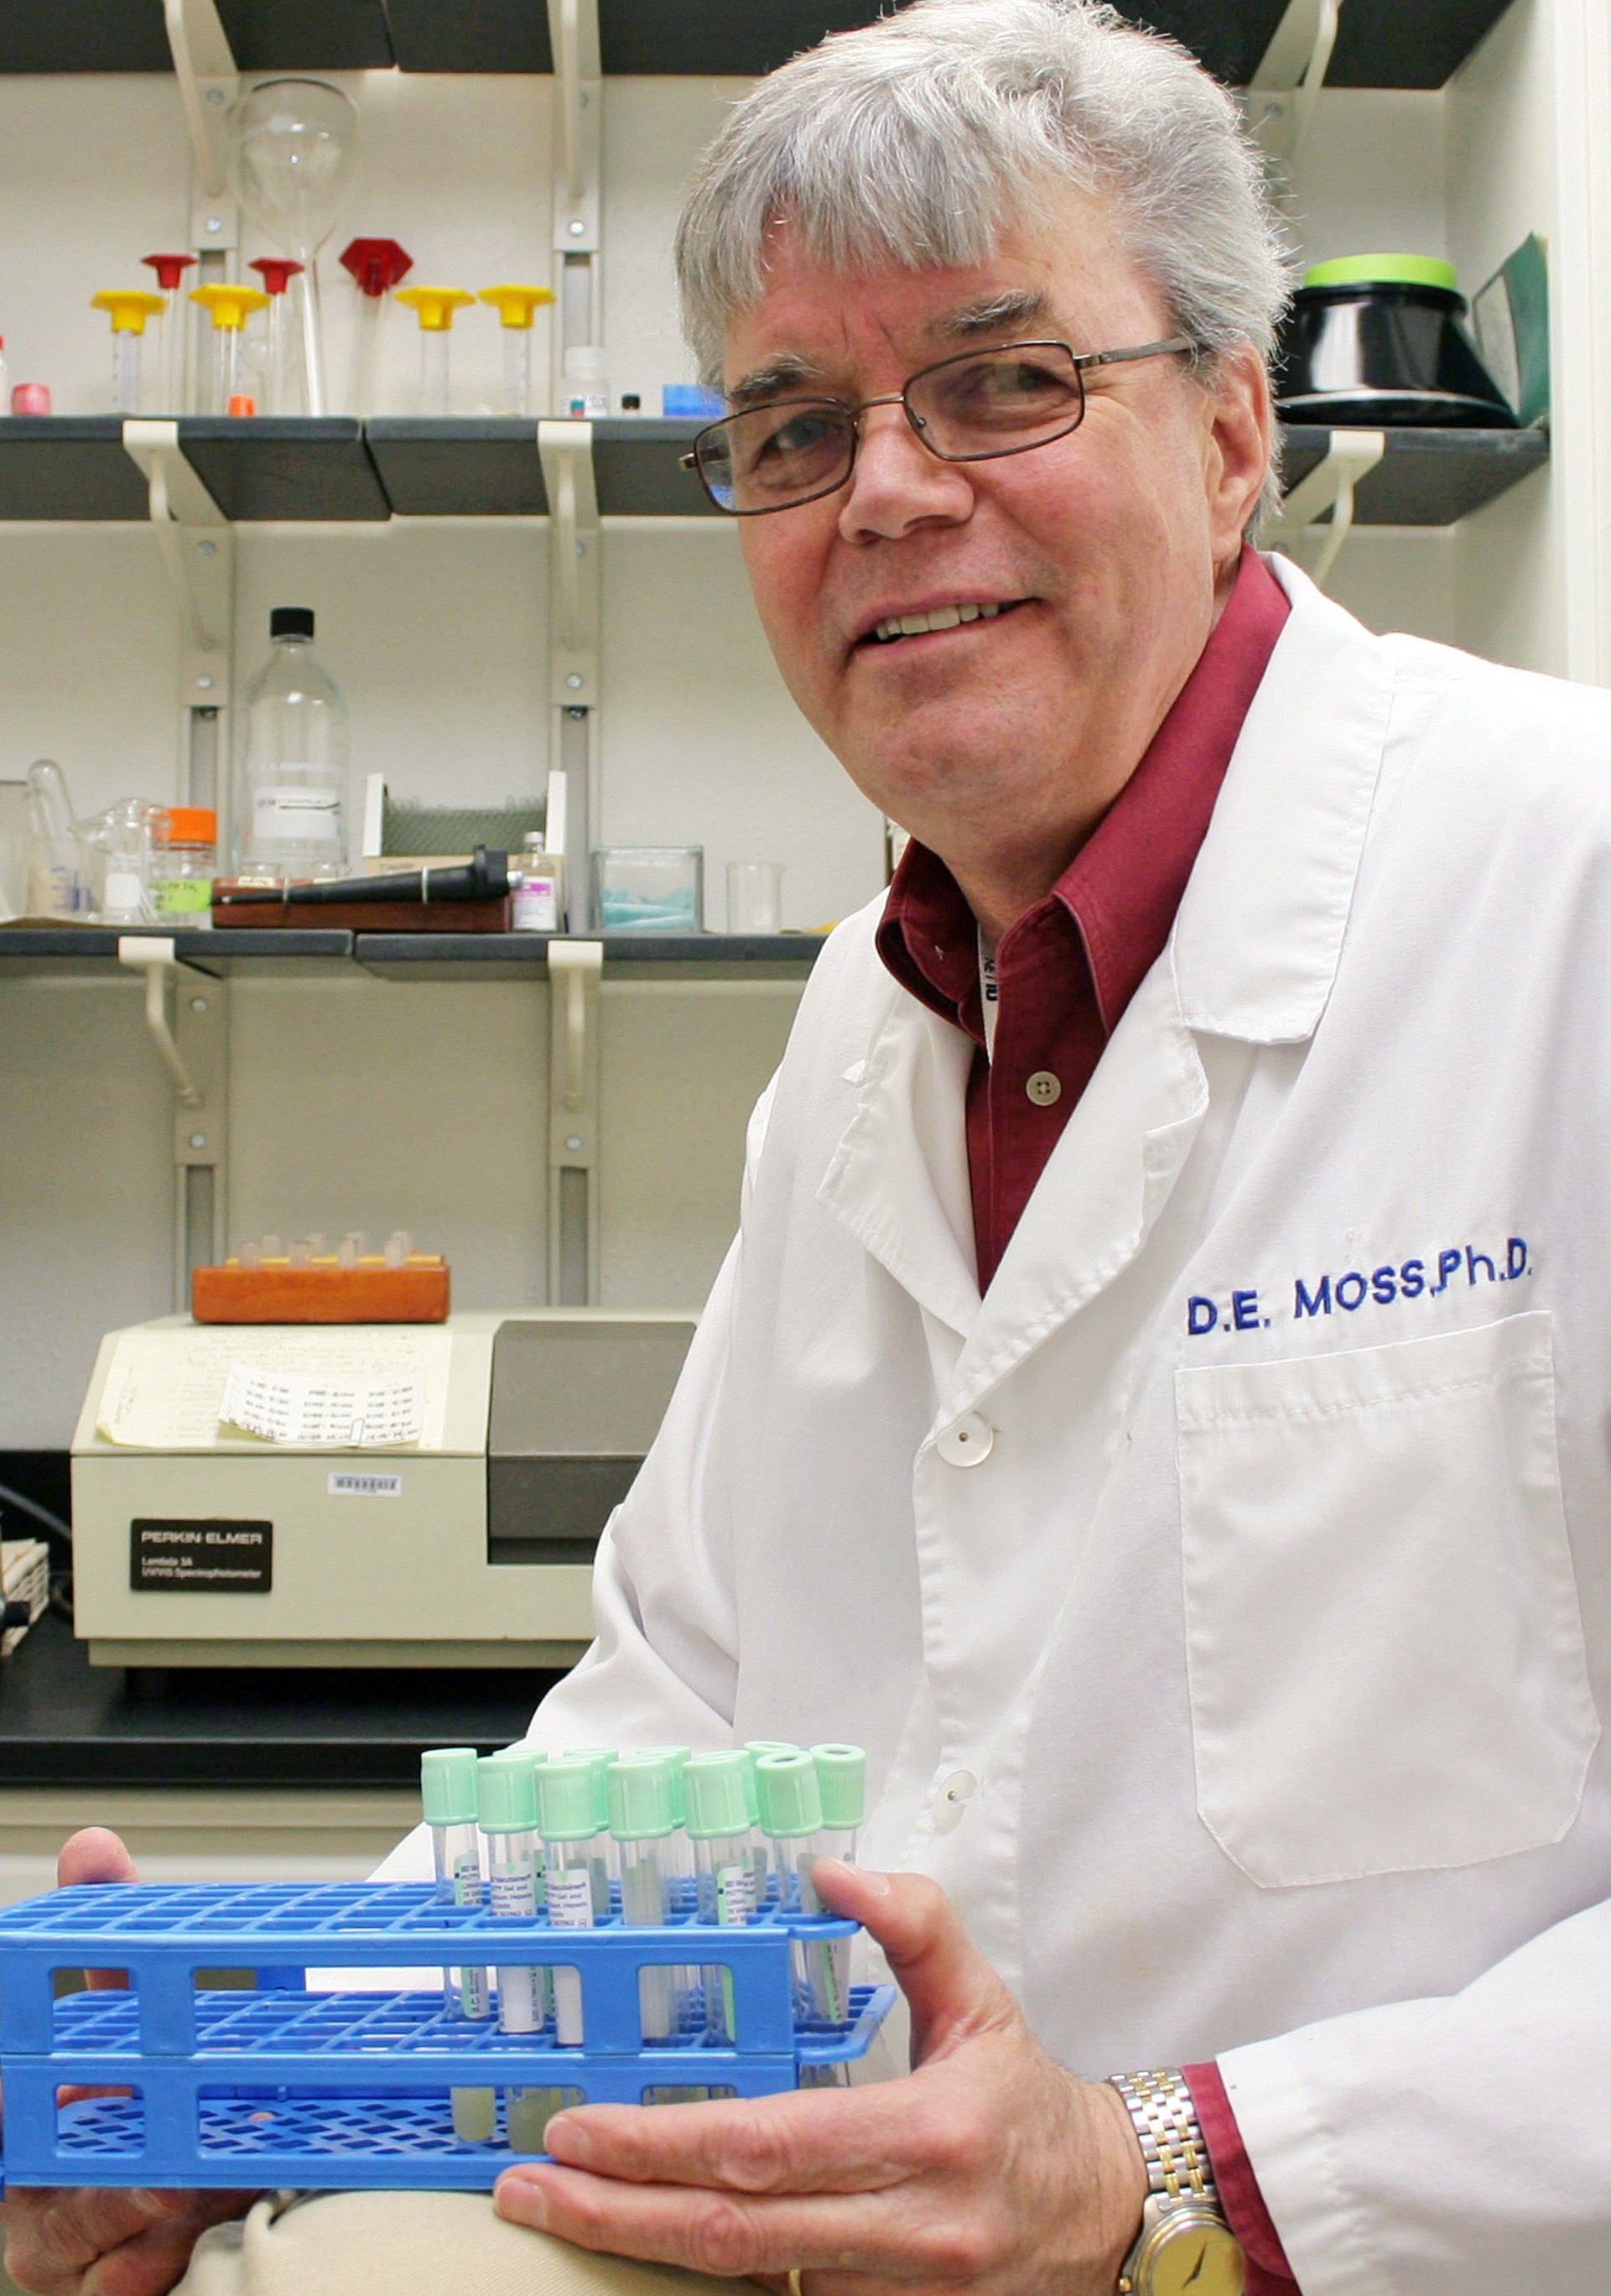 dr moss in the lab - cropped - UTEP News service